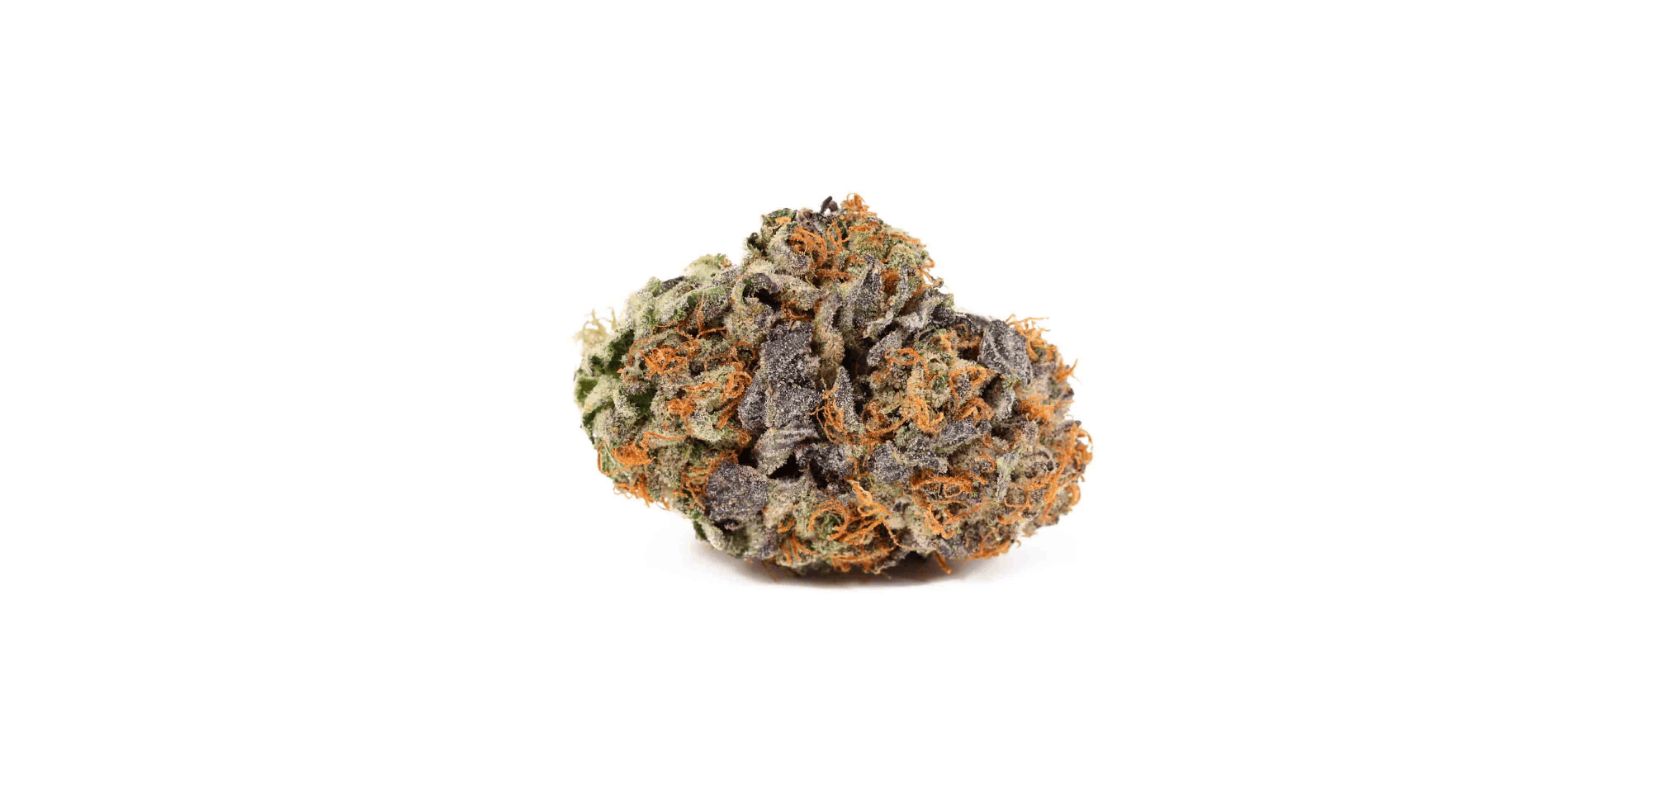 Gorilla Bomb's flavour mirrors its aroma. It has a sweetness and tasty chocolatey diesel notes with accents of pine and earth.